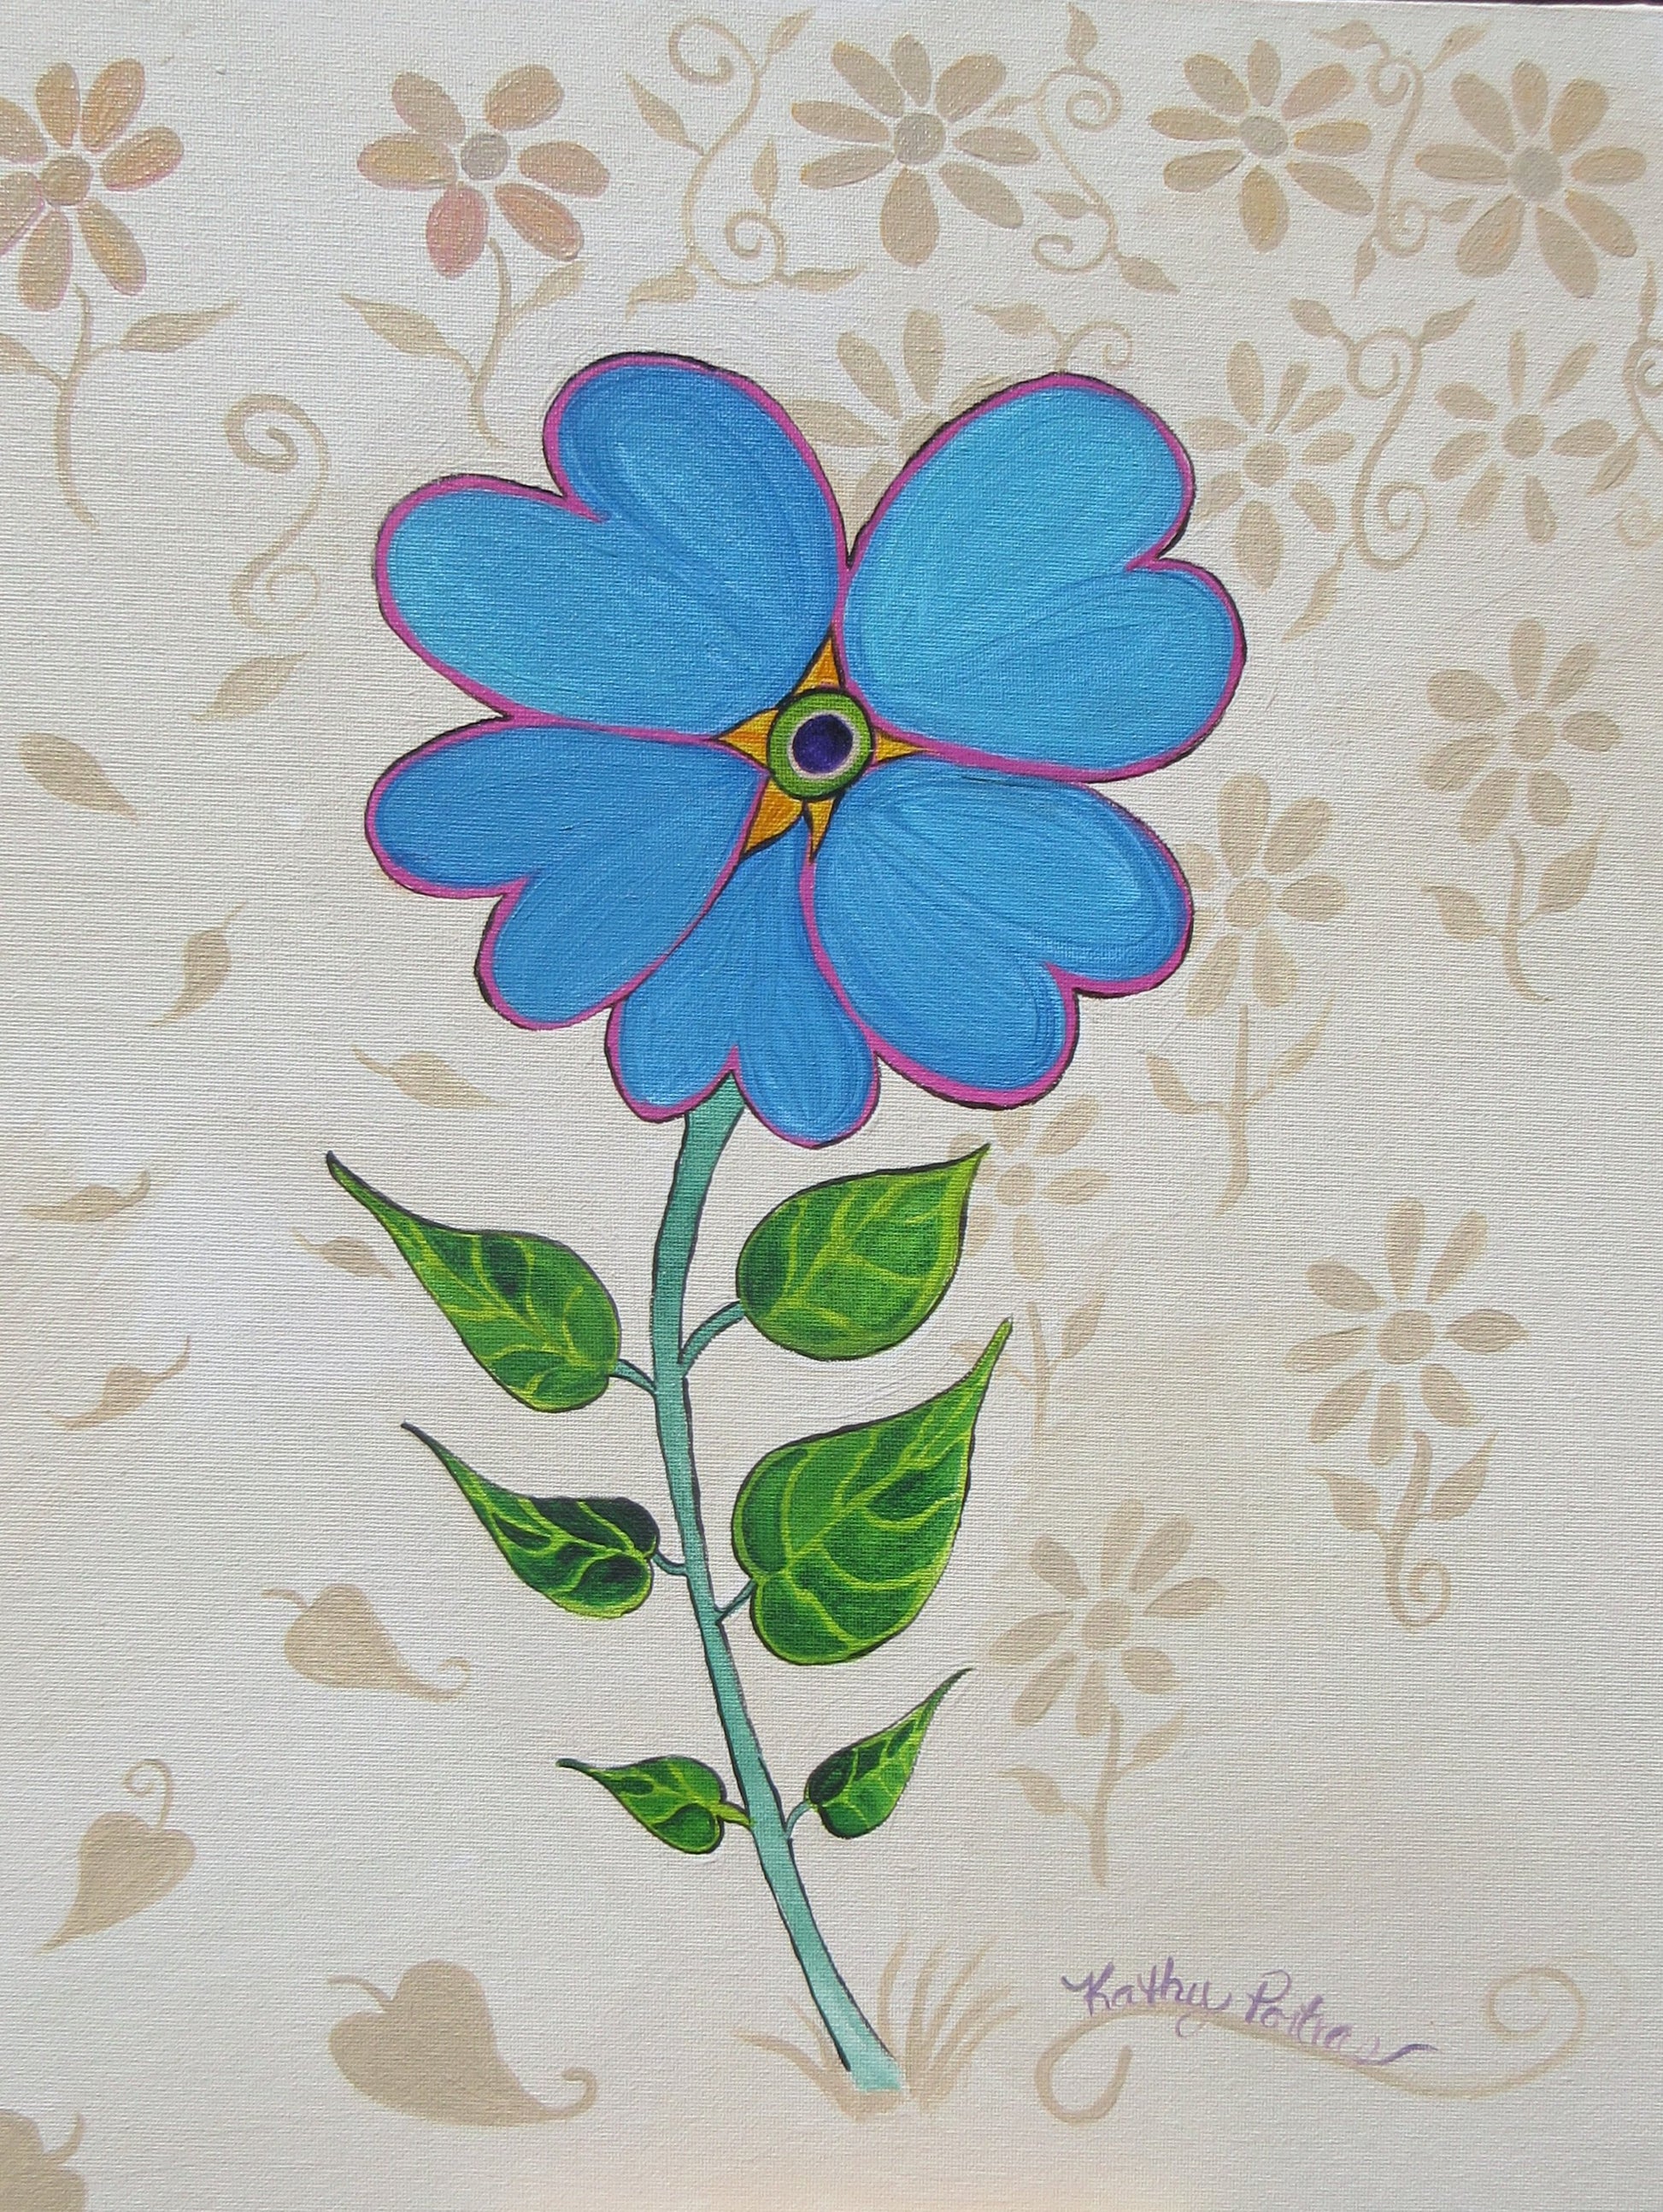 An acrylic painting of a single tiny blue Forget Me Not blossom. The background is beige with impressions of natural elements in a darker beige. A classic folk art style by Canadian folk artist Kathy Poitras. 